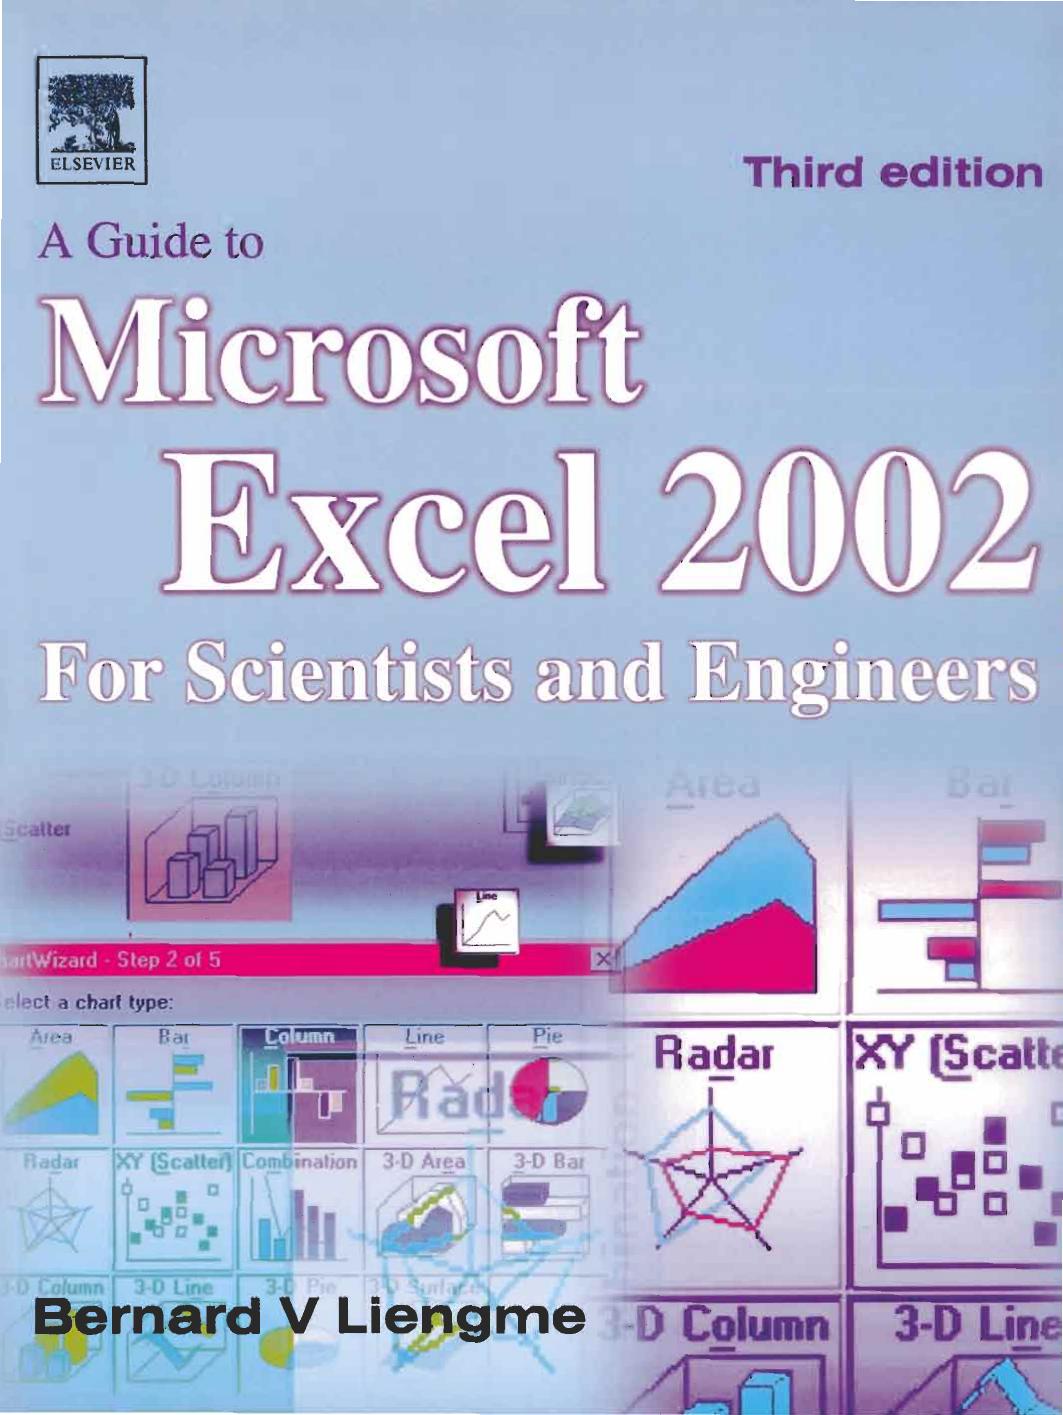 A Guide to Microsoft Excel 2002 for Scientists and Engineers: Third Edition